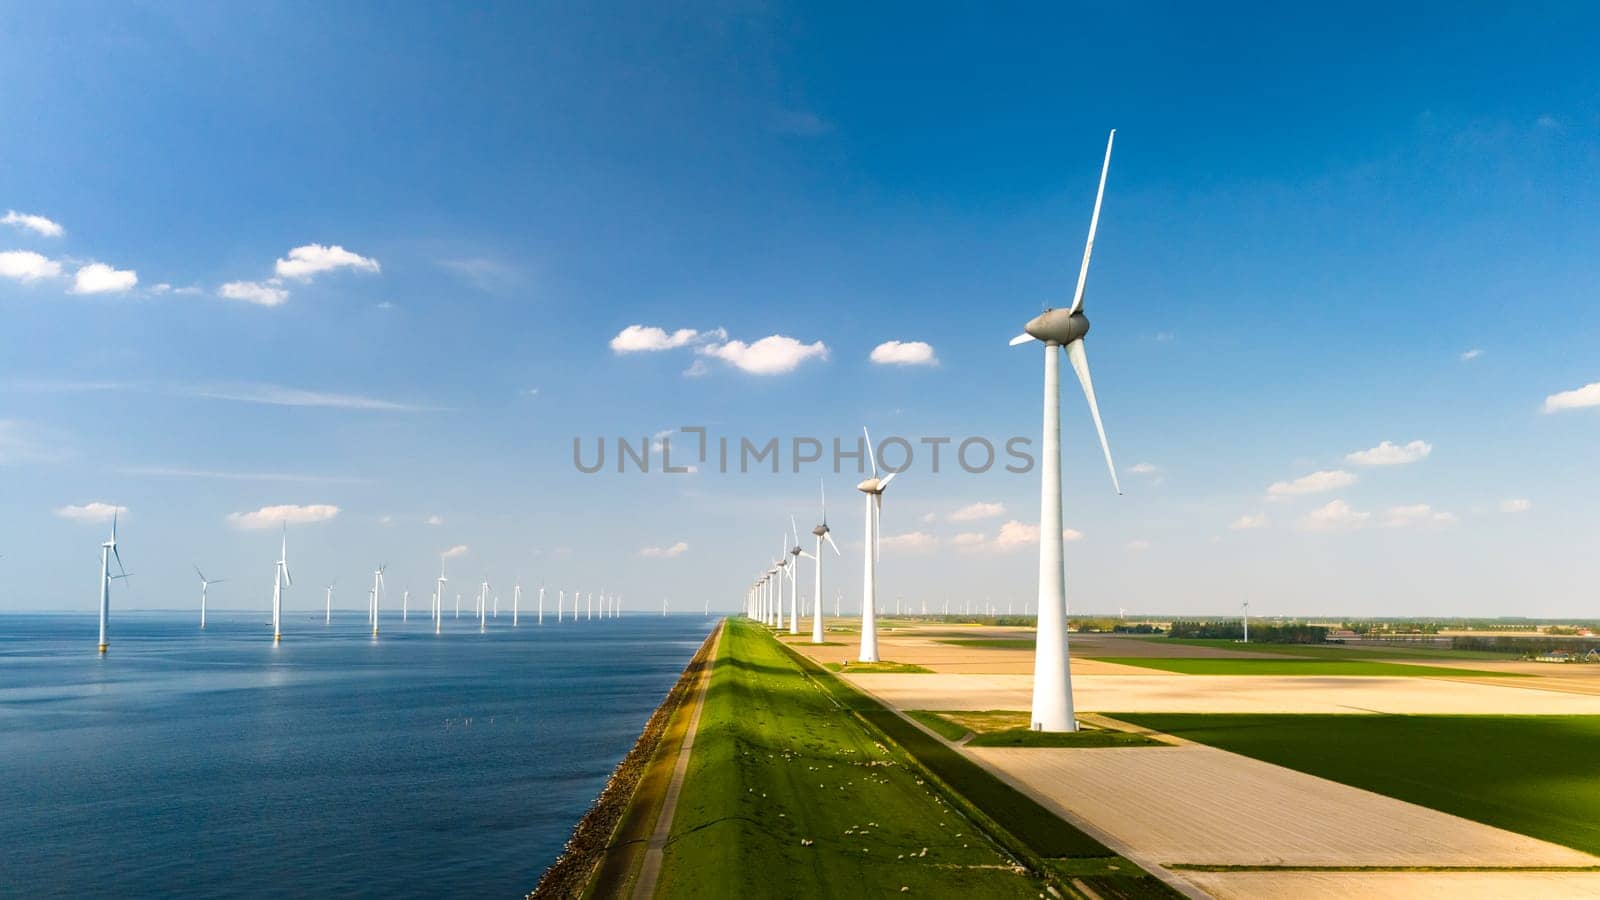 A row of towering wind turbines gracefully spin with the breeze next to a tranquil body of water in the Netherlands Flevoland region by fokkebok